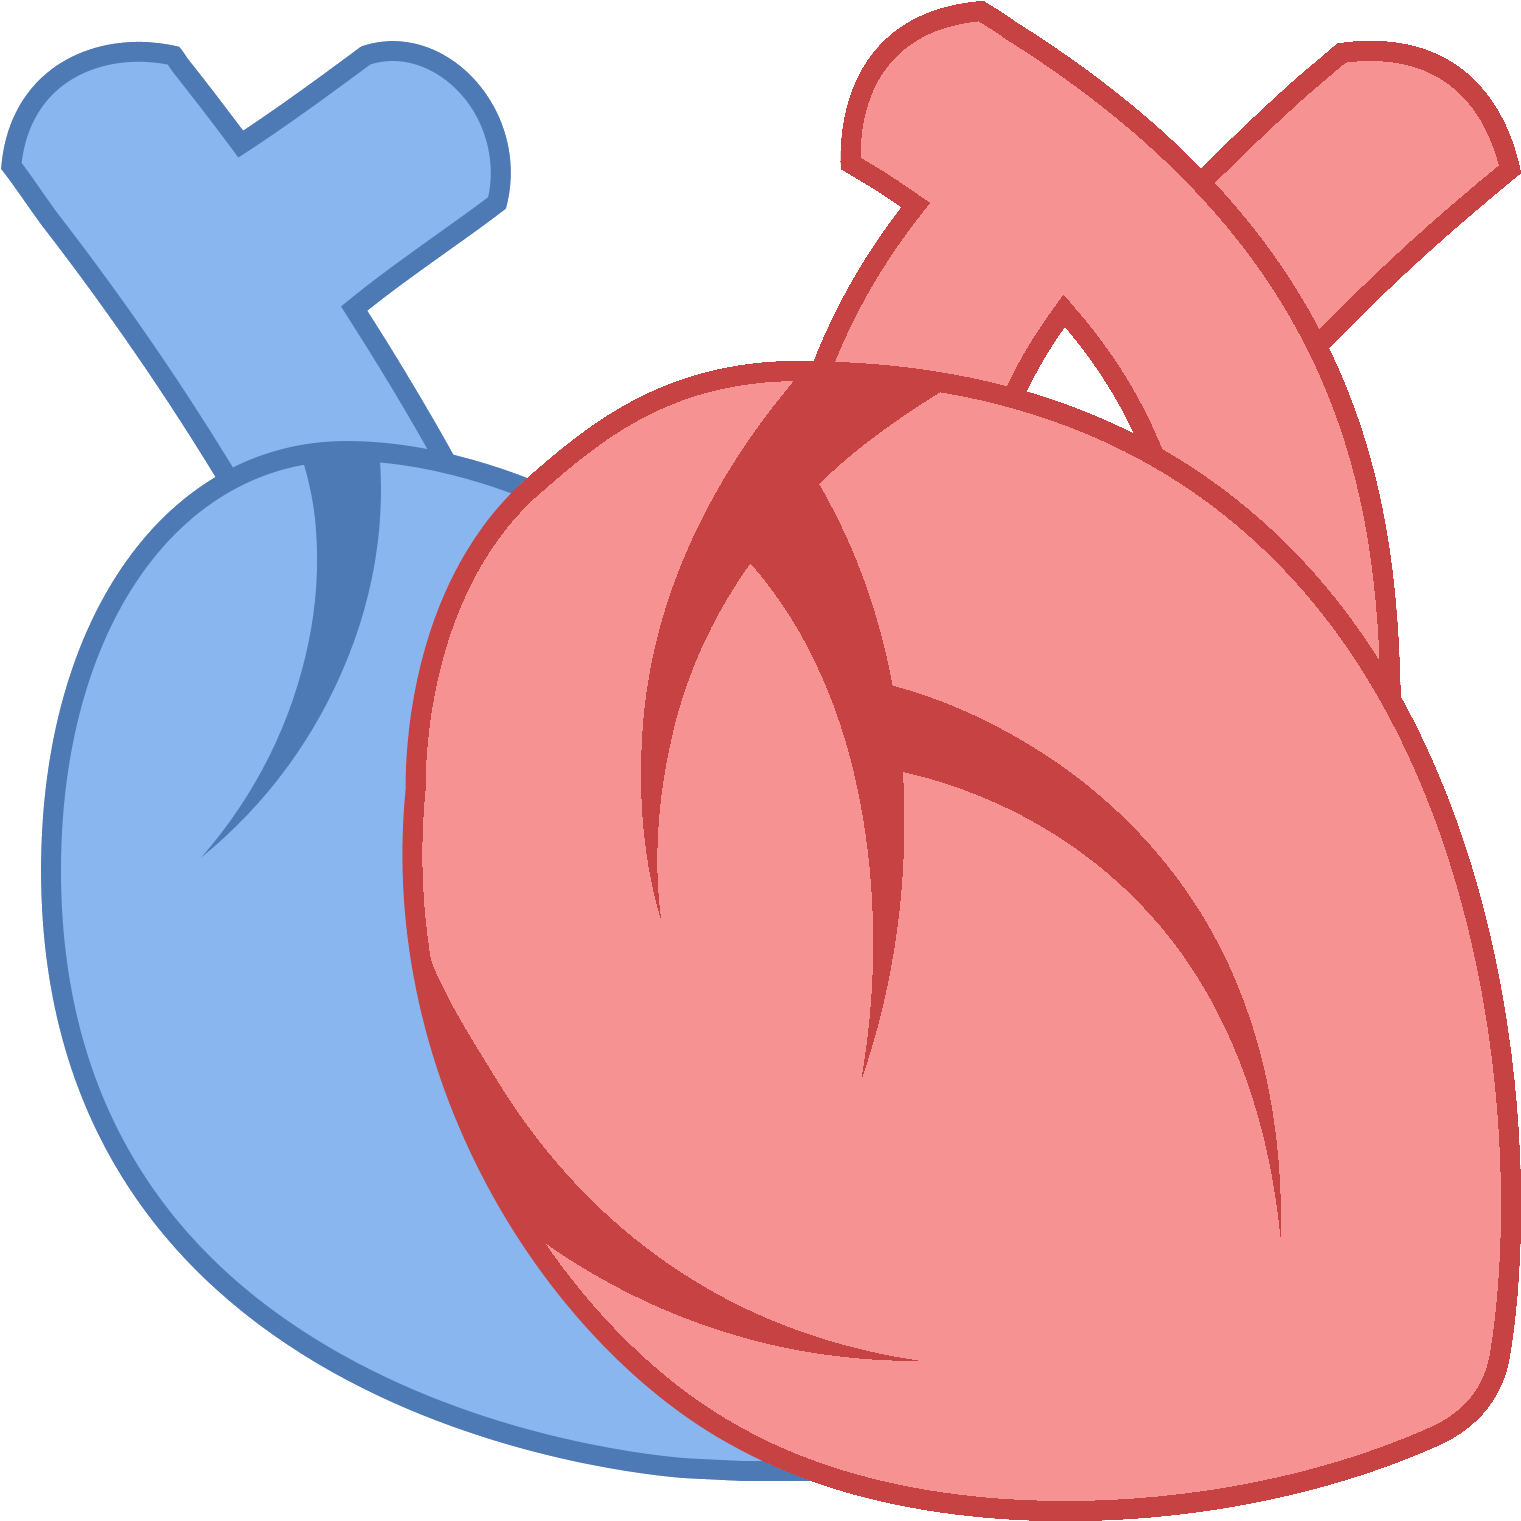 Stylized Anatomical Heart Icon PNG